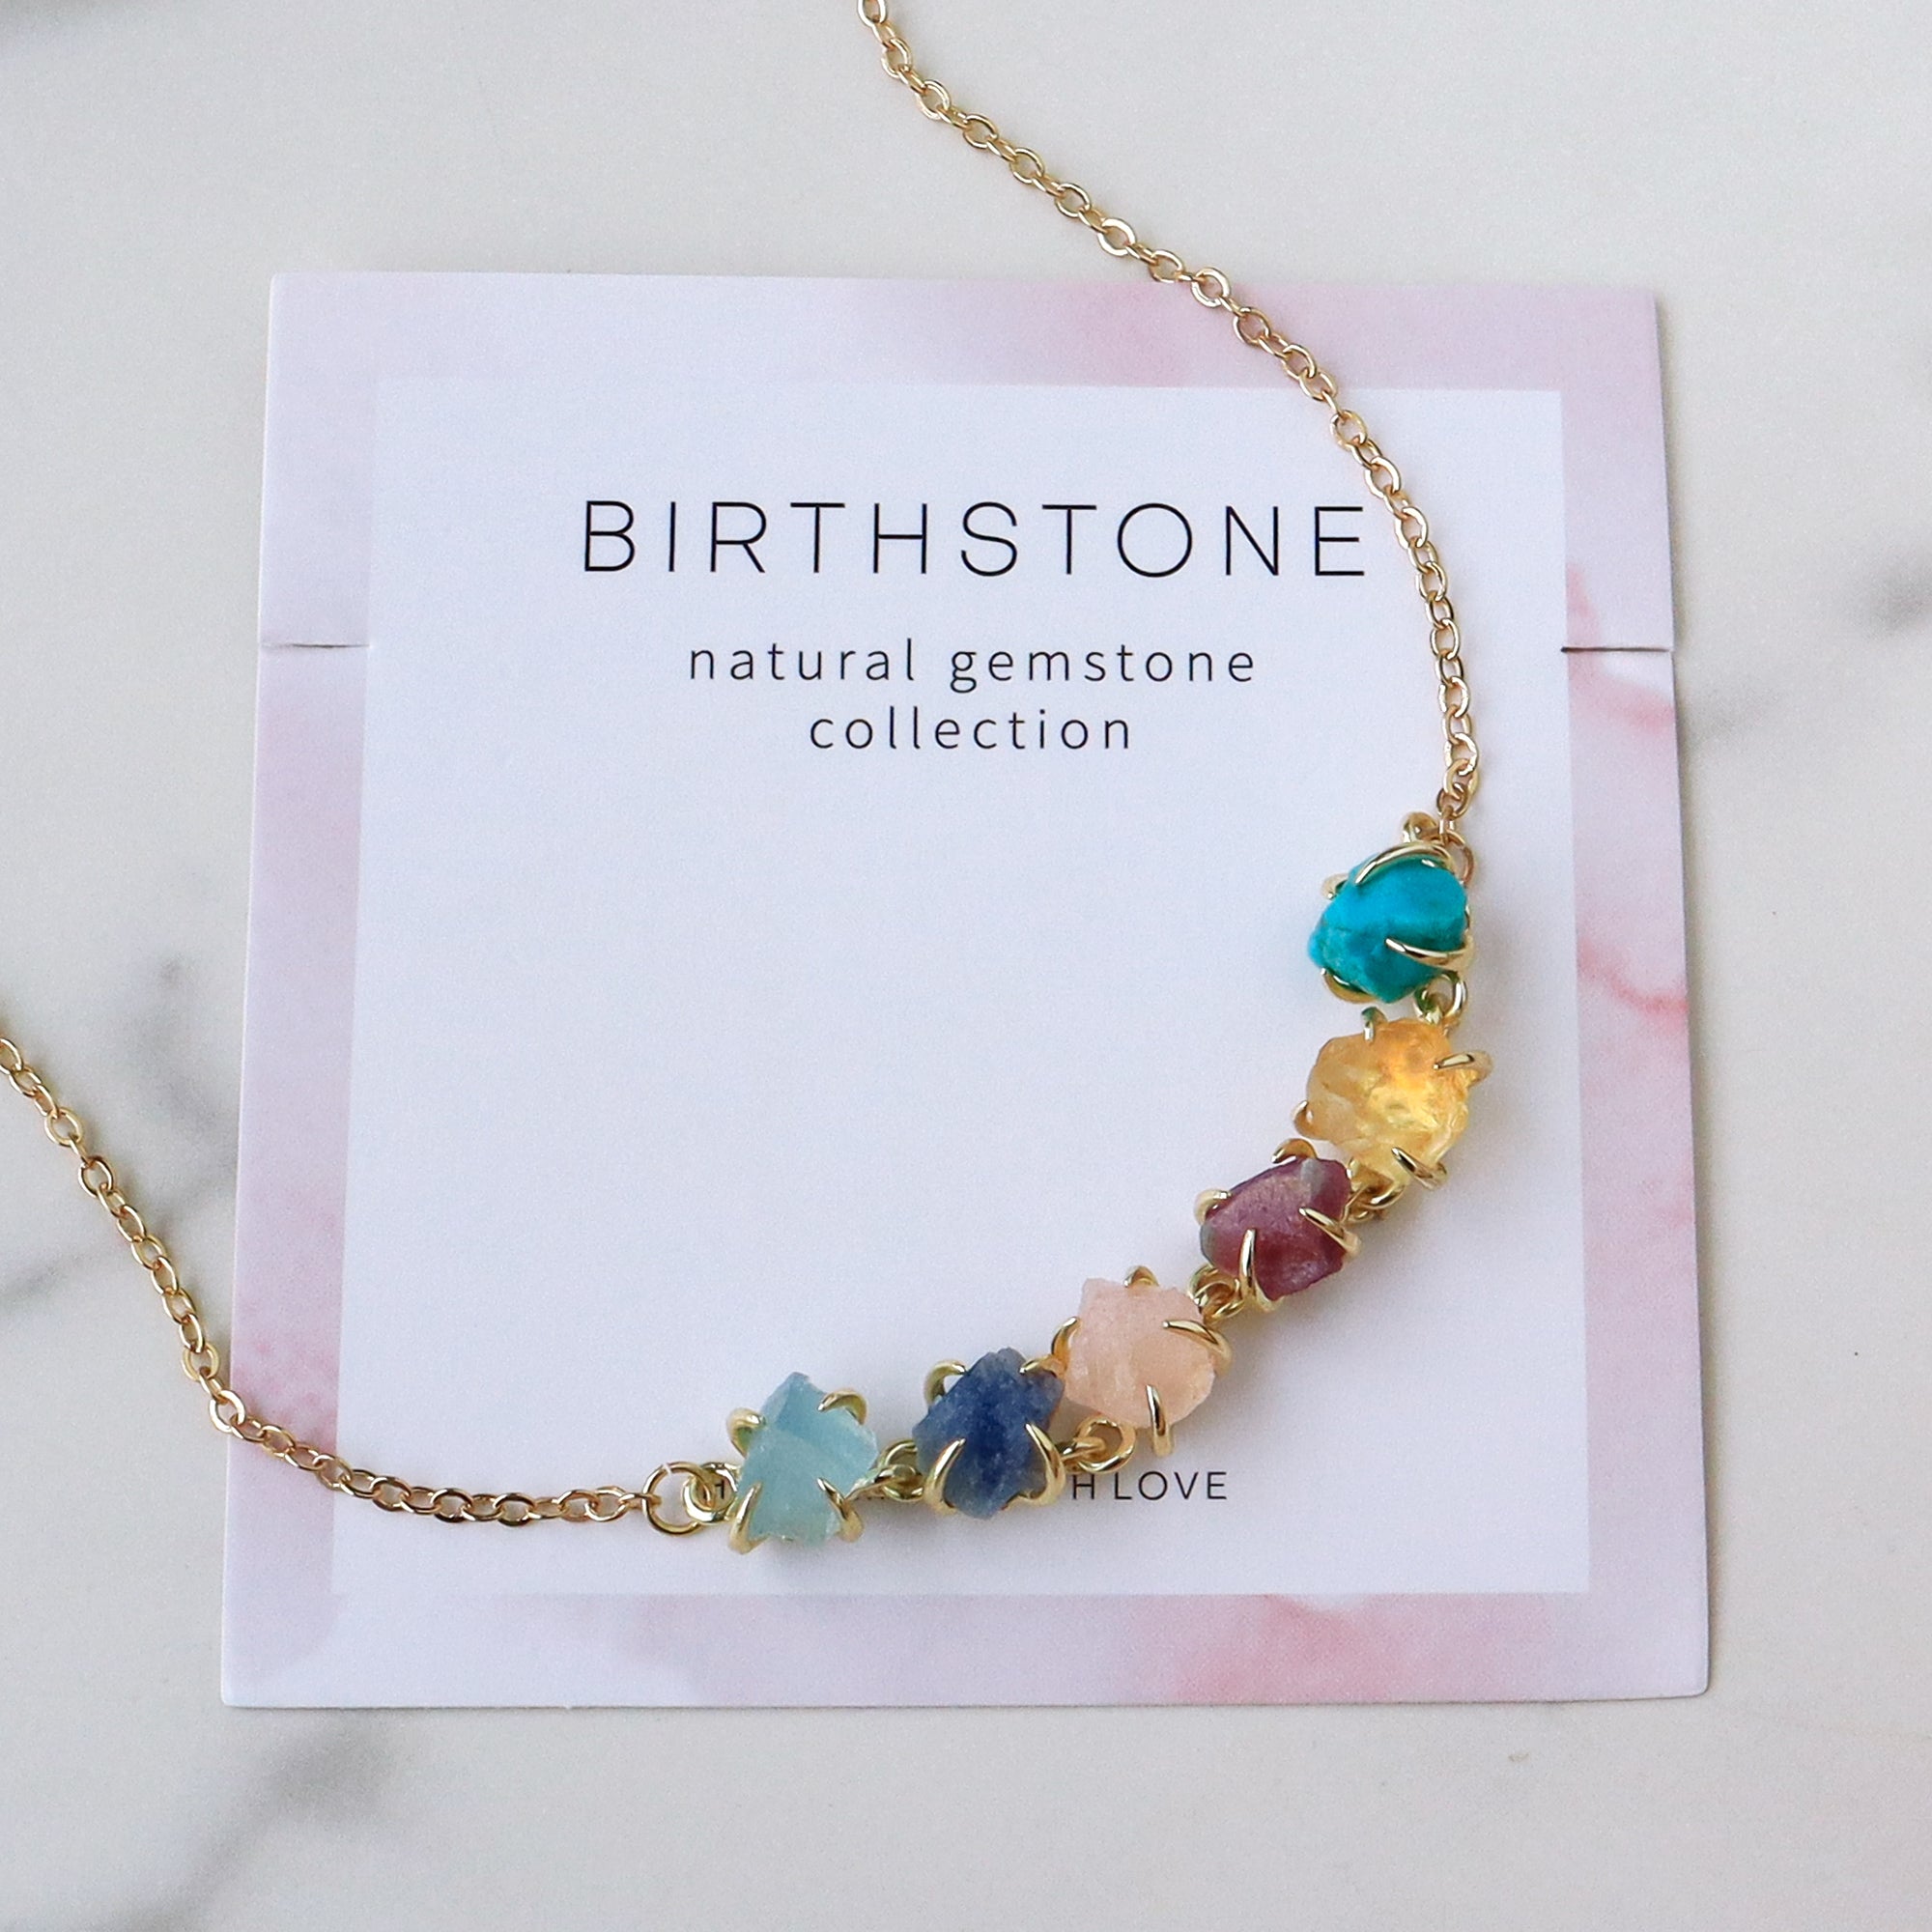 Gold Plated Claw Raw Birthstone Necklace, 16 Inch, Healing Crystal Stone Necklace, Natural Gemstone Jewelry BT016